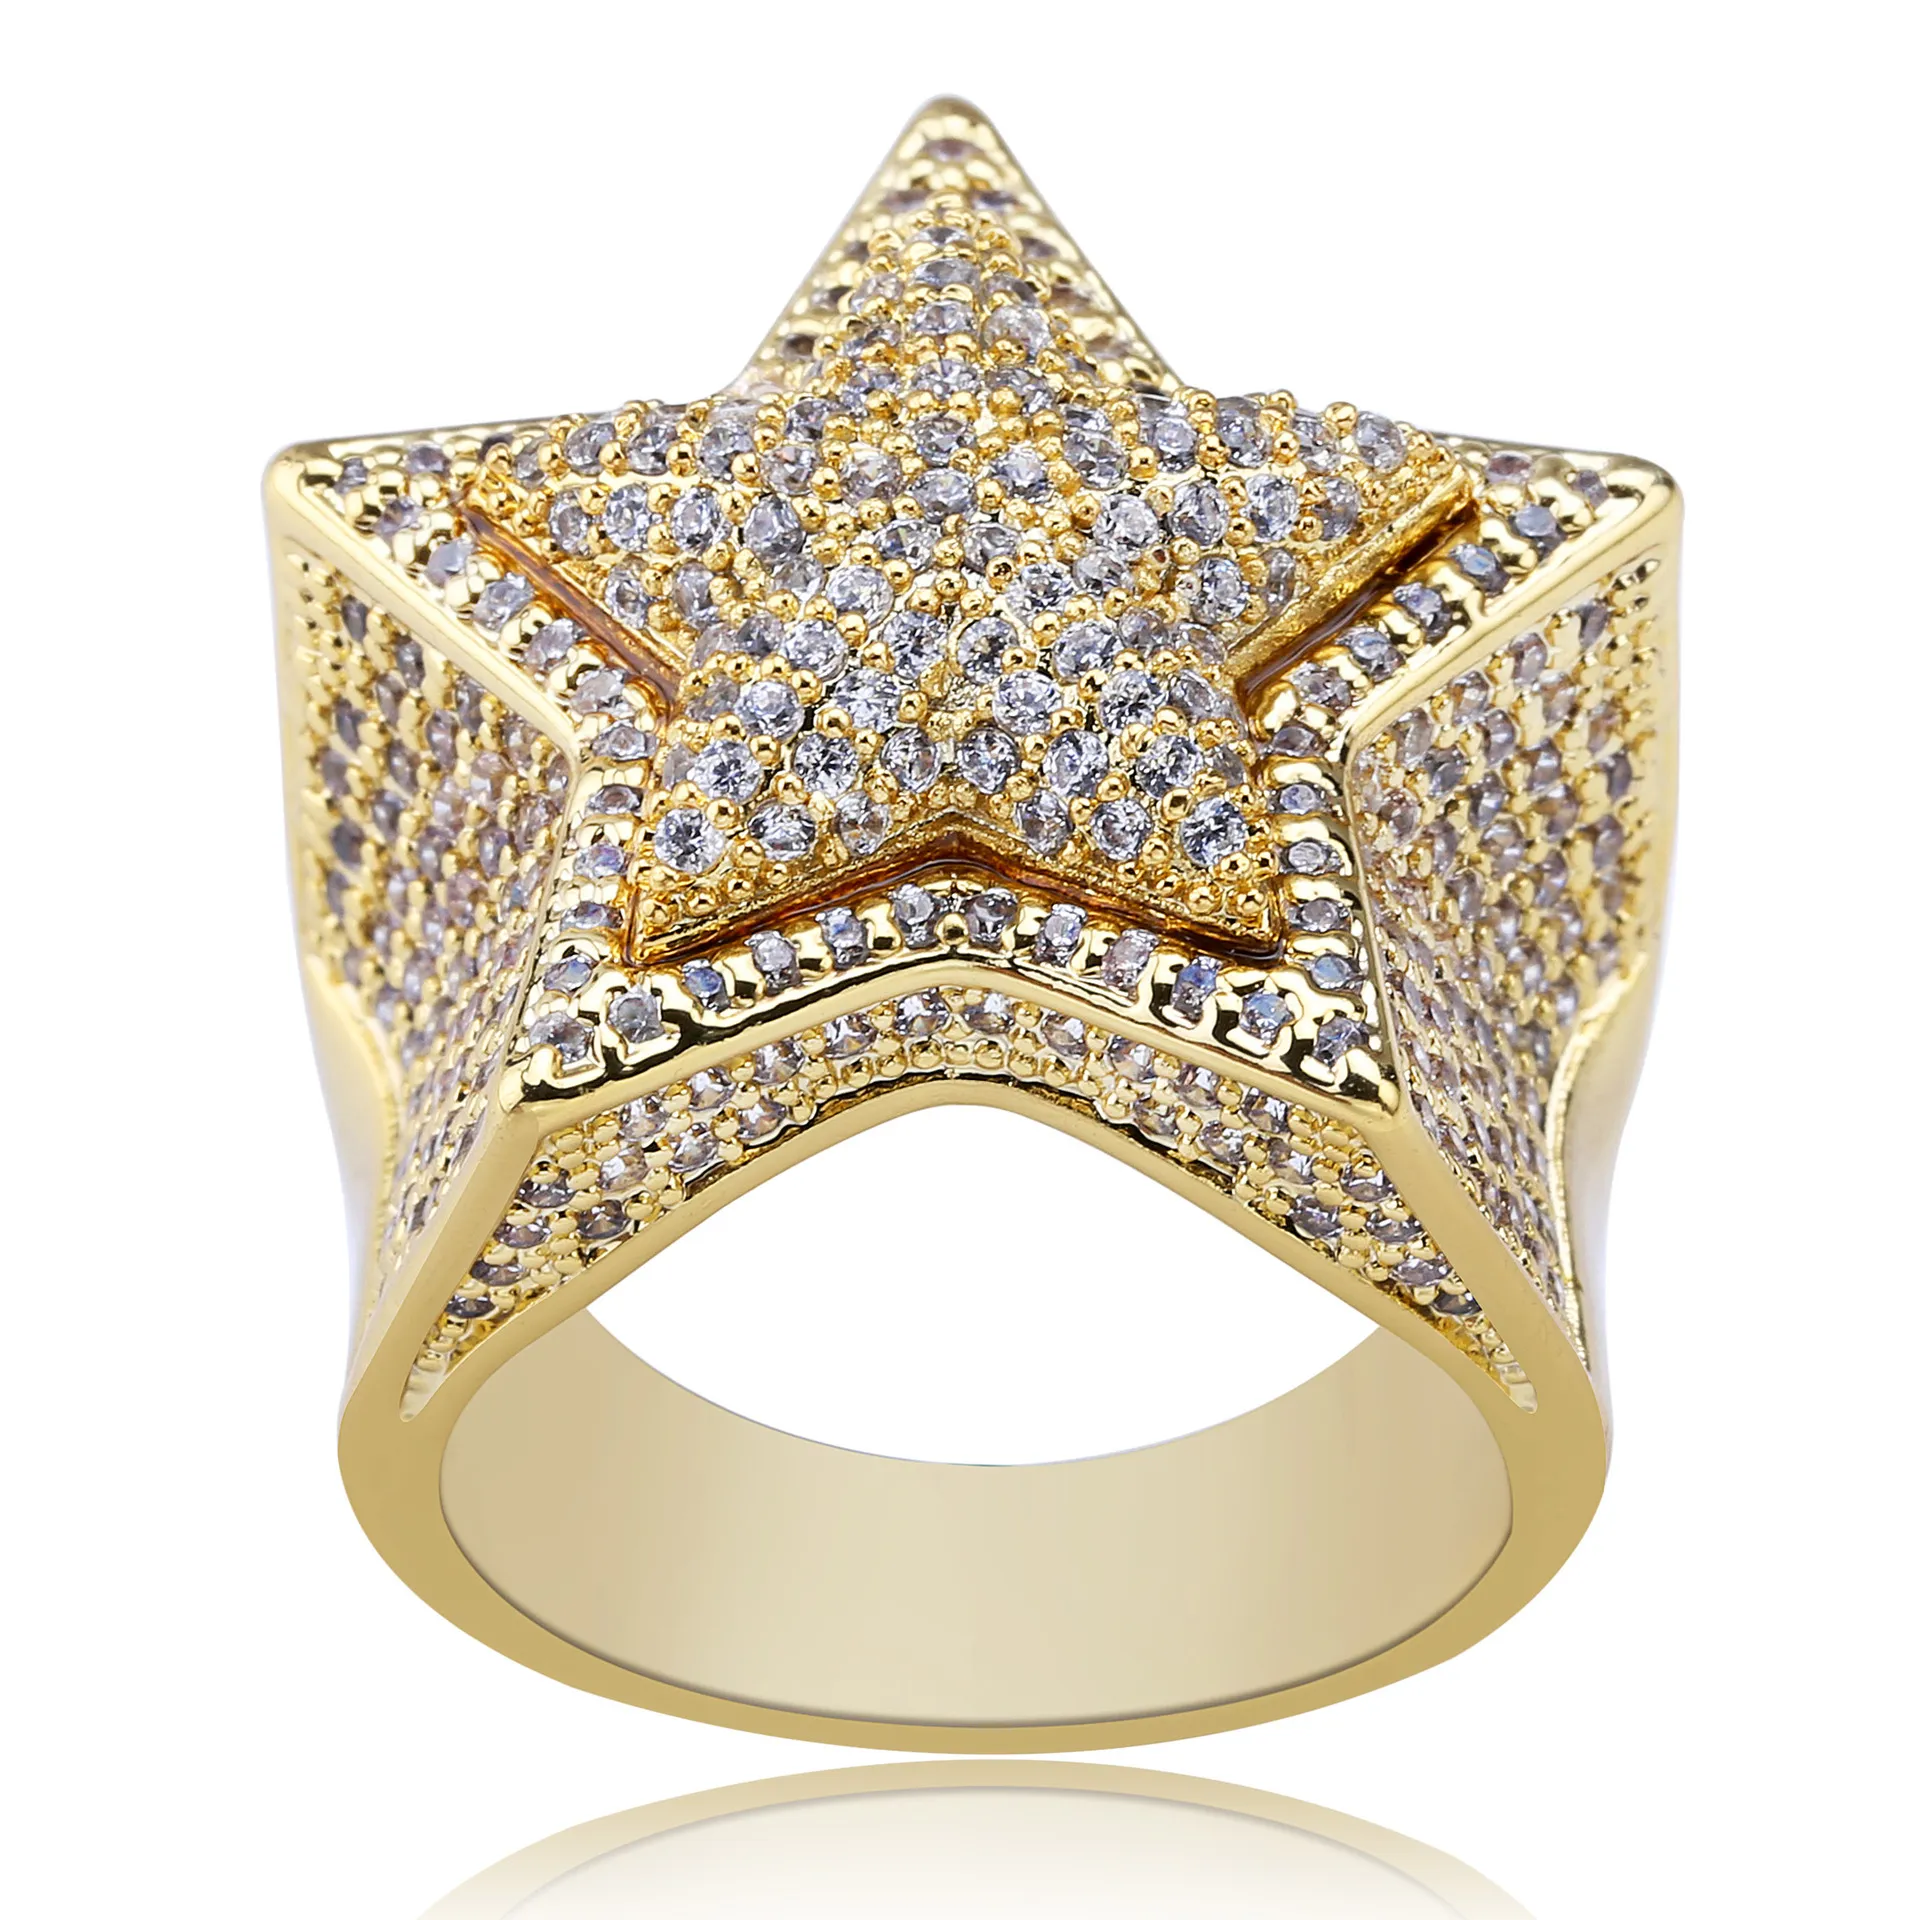 Luxury Designer Jewelry Mens Rings Gold Silver Hip Hop Jewelry Wedding Engagement Ring Iced Out Bling Diamond Championship Star DJ Fashion